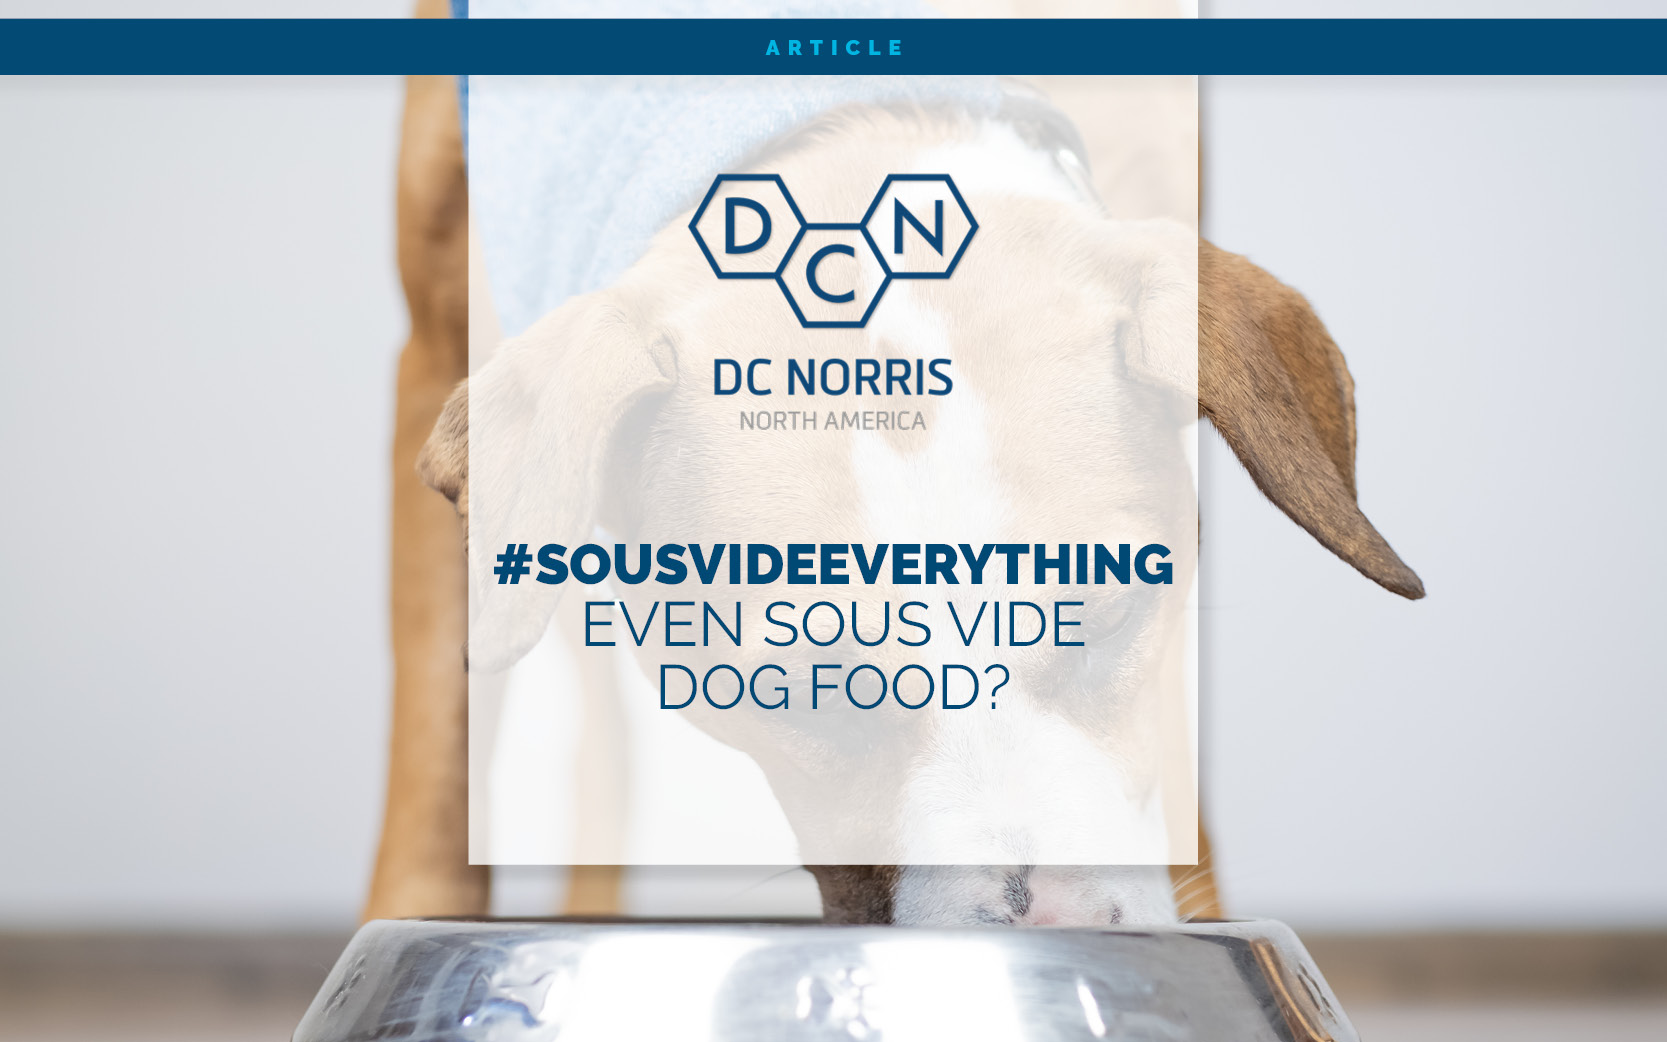 an image of a dog eating food from his stainless steel bowl. the headline reads '#sousvideeverything Even Sous Vide Dog Food?" and is below the DC Norris North America logo